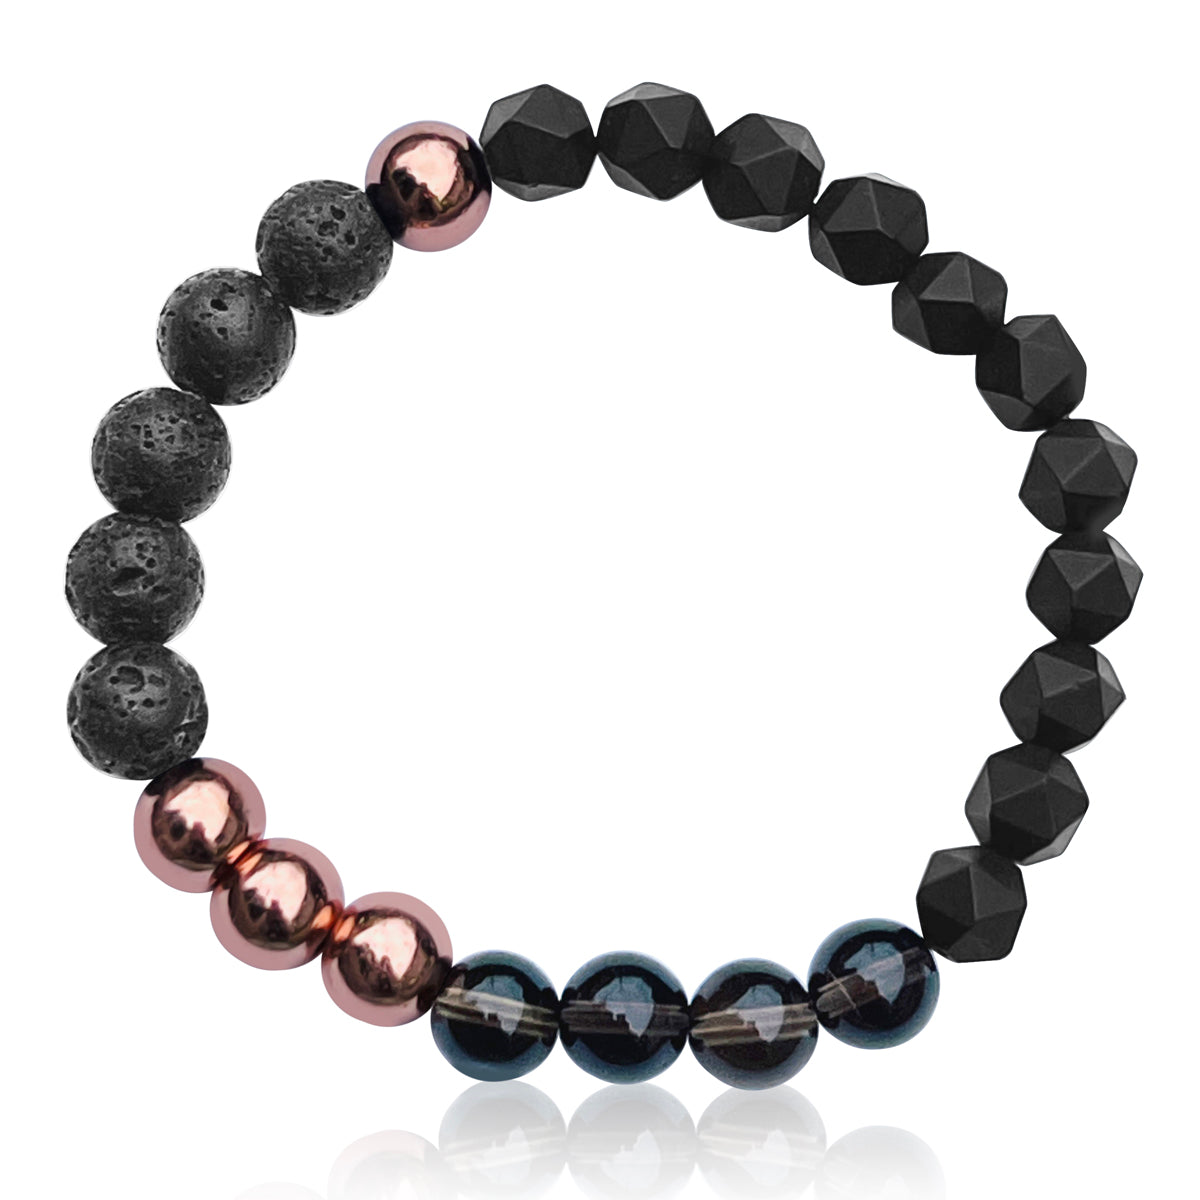 The combination of these gemstones in the "Soul Alignment" bracelet is intended to create a holistic experience that aligns your physical and mental well-being.